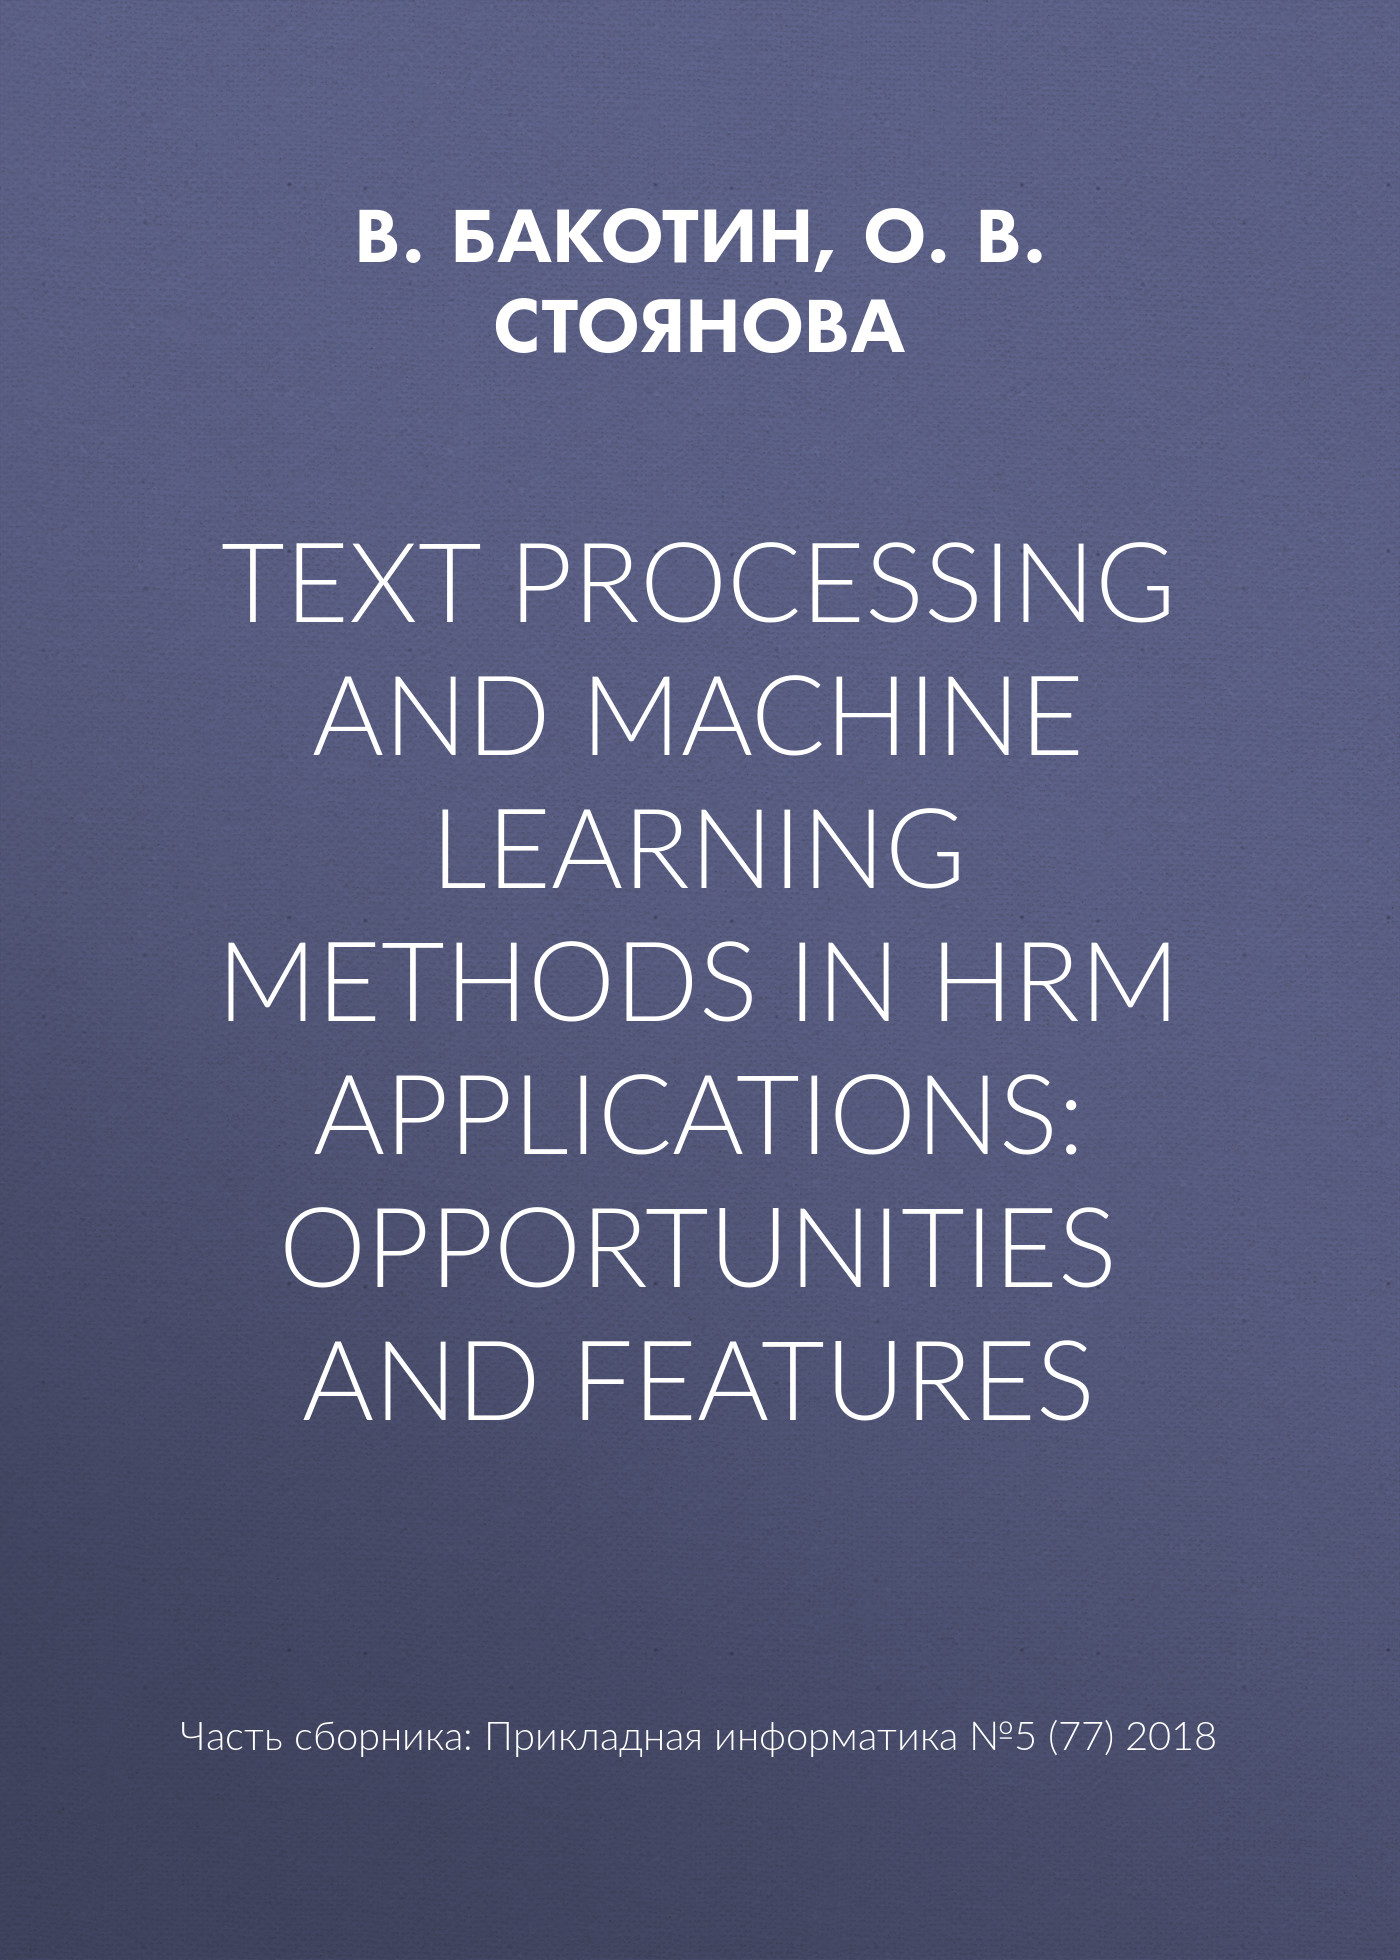 О. В. Стоянова Text processing and machine learning methods in HRM applications: opportunities and features